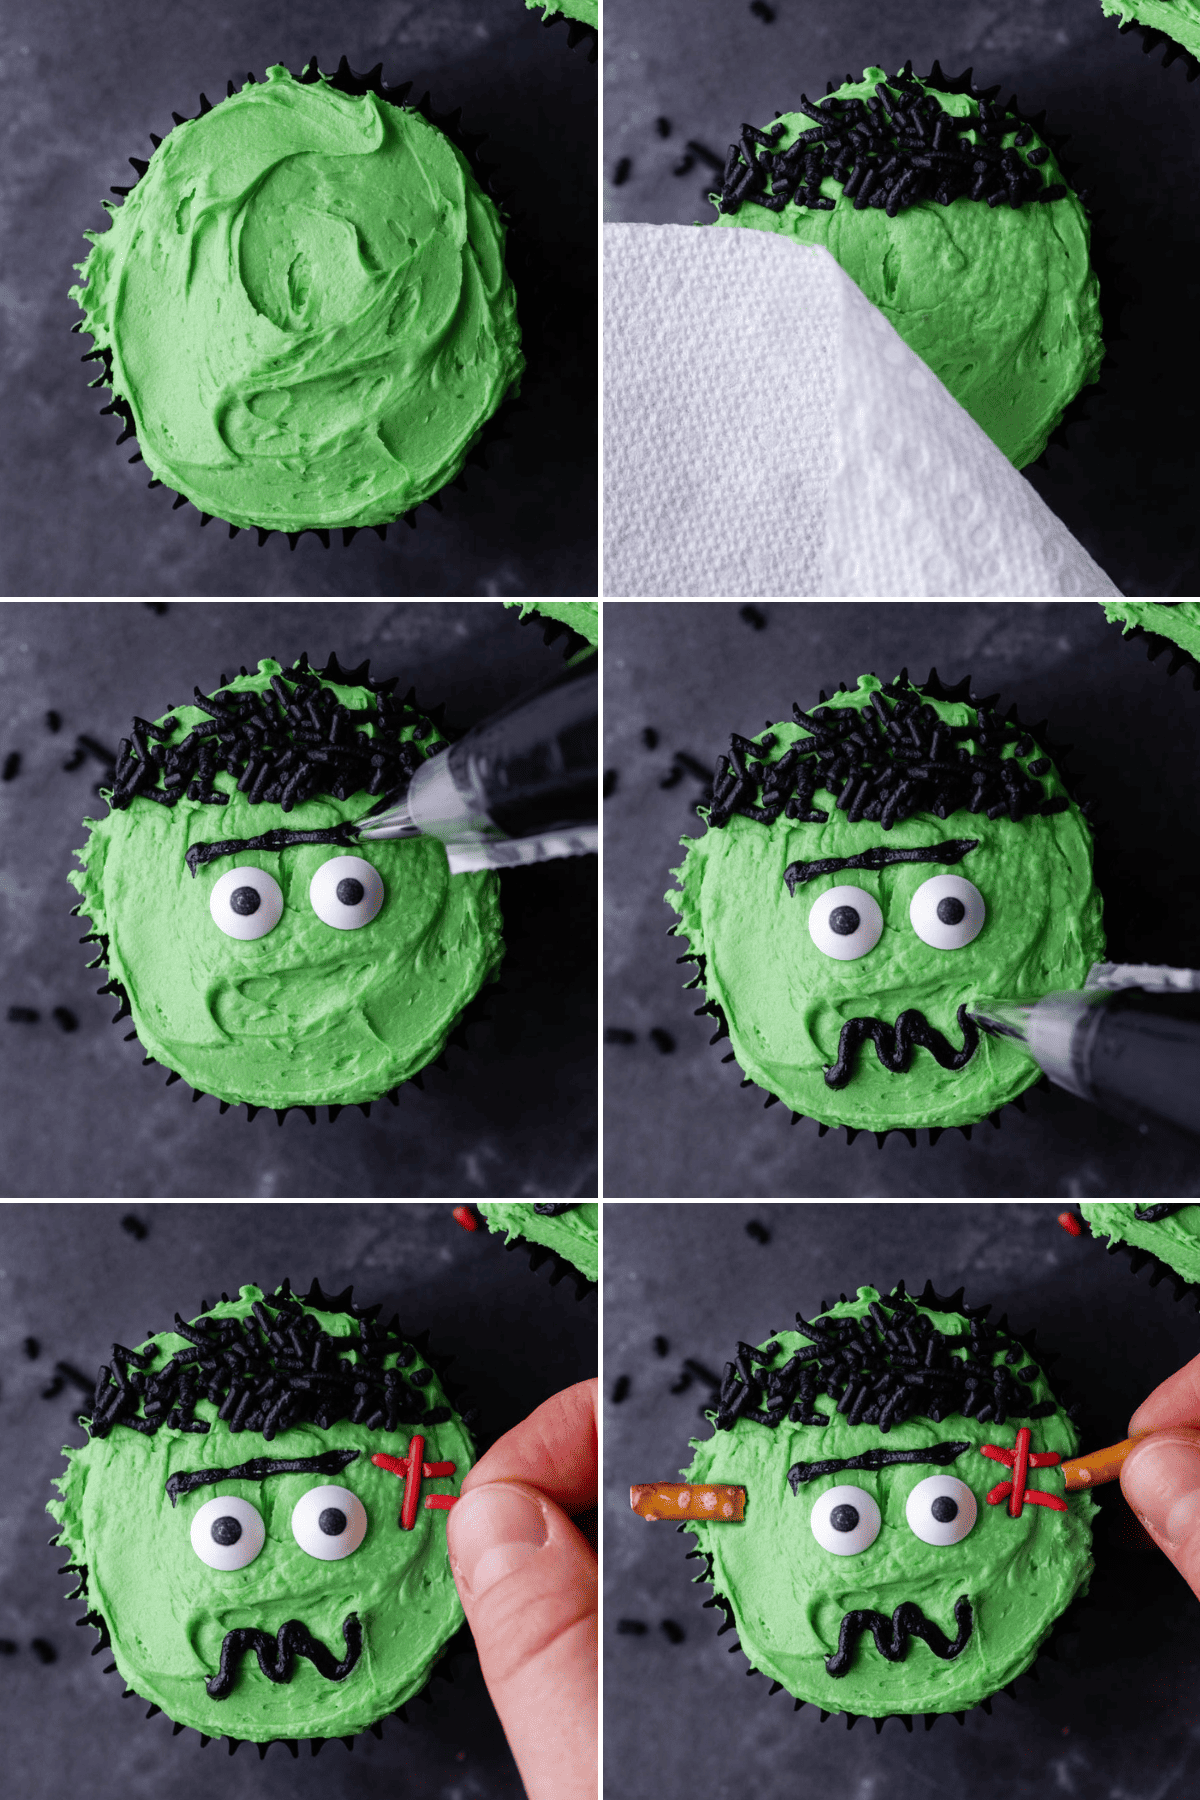 A collage of the step by step guide to decorating frankenstein cupcakes